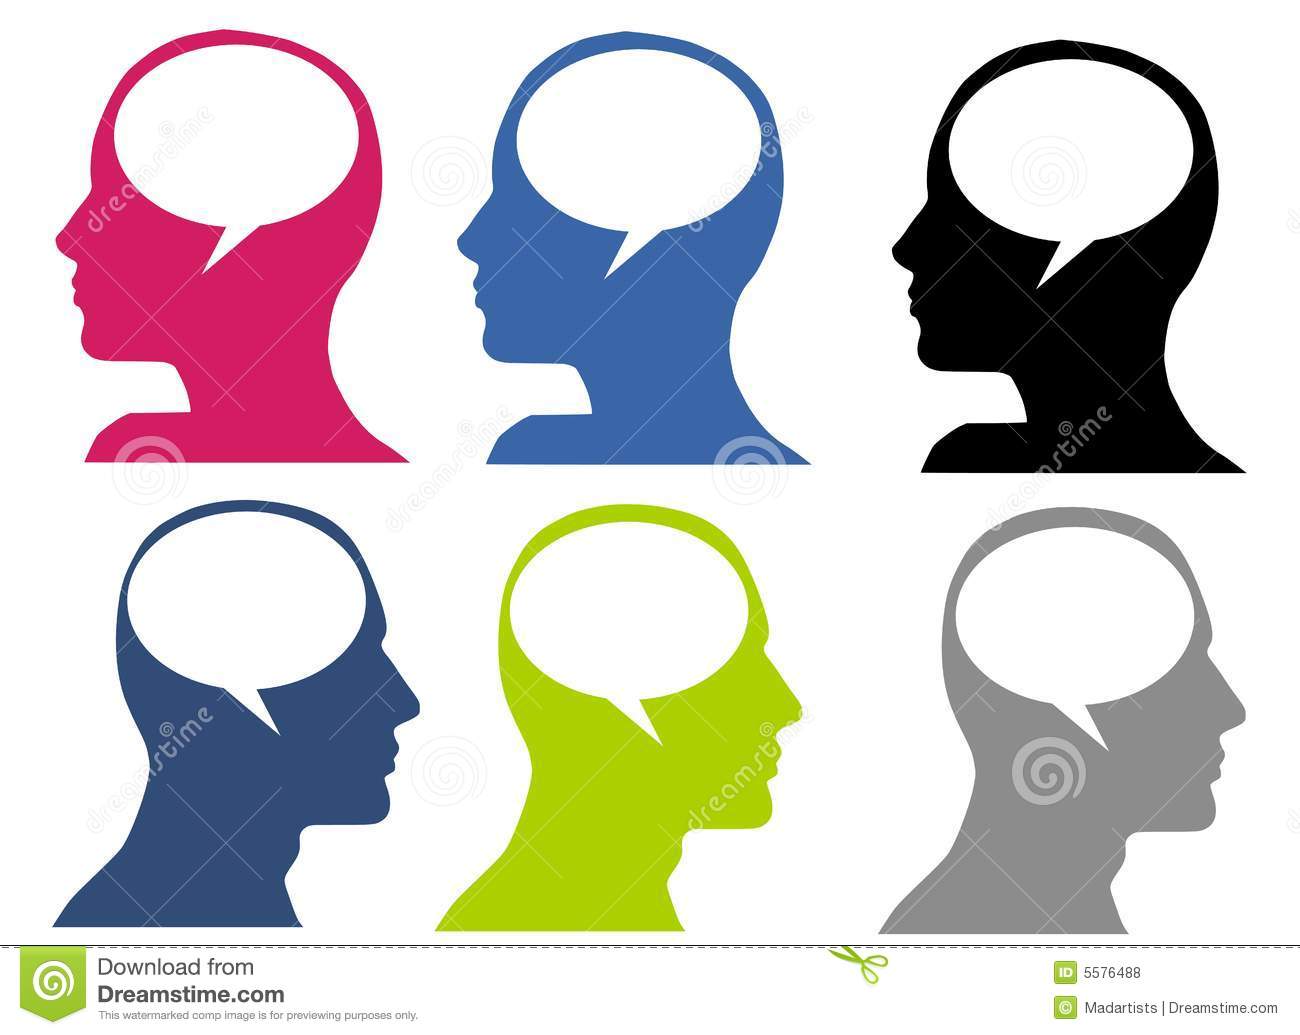 Inside Their Heads To Represent Internal Dialogue   Male And Female